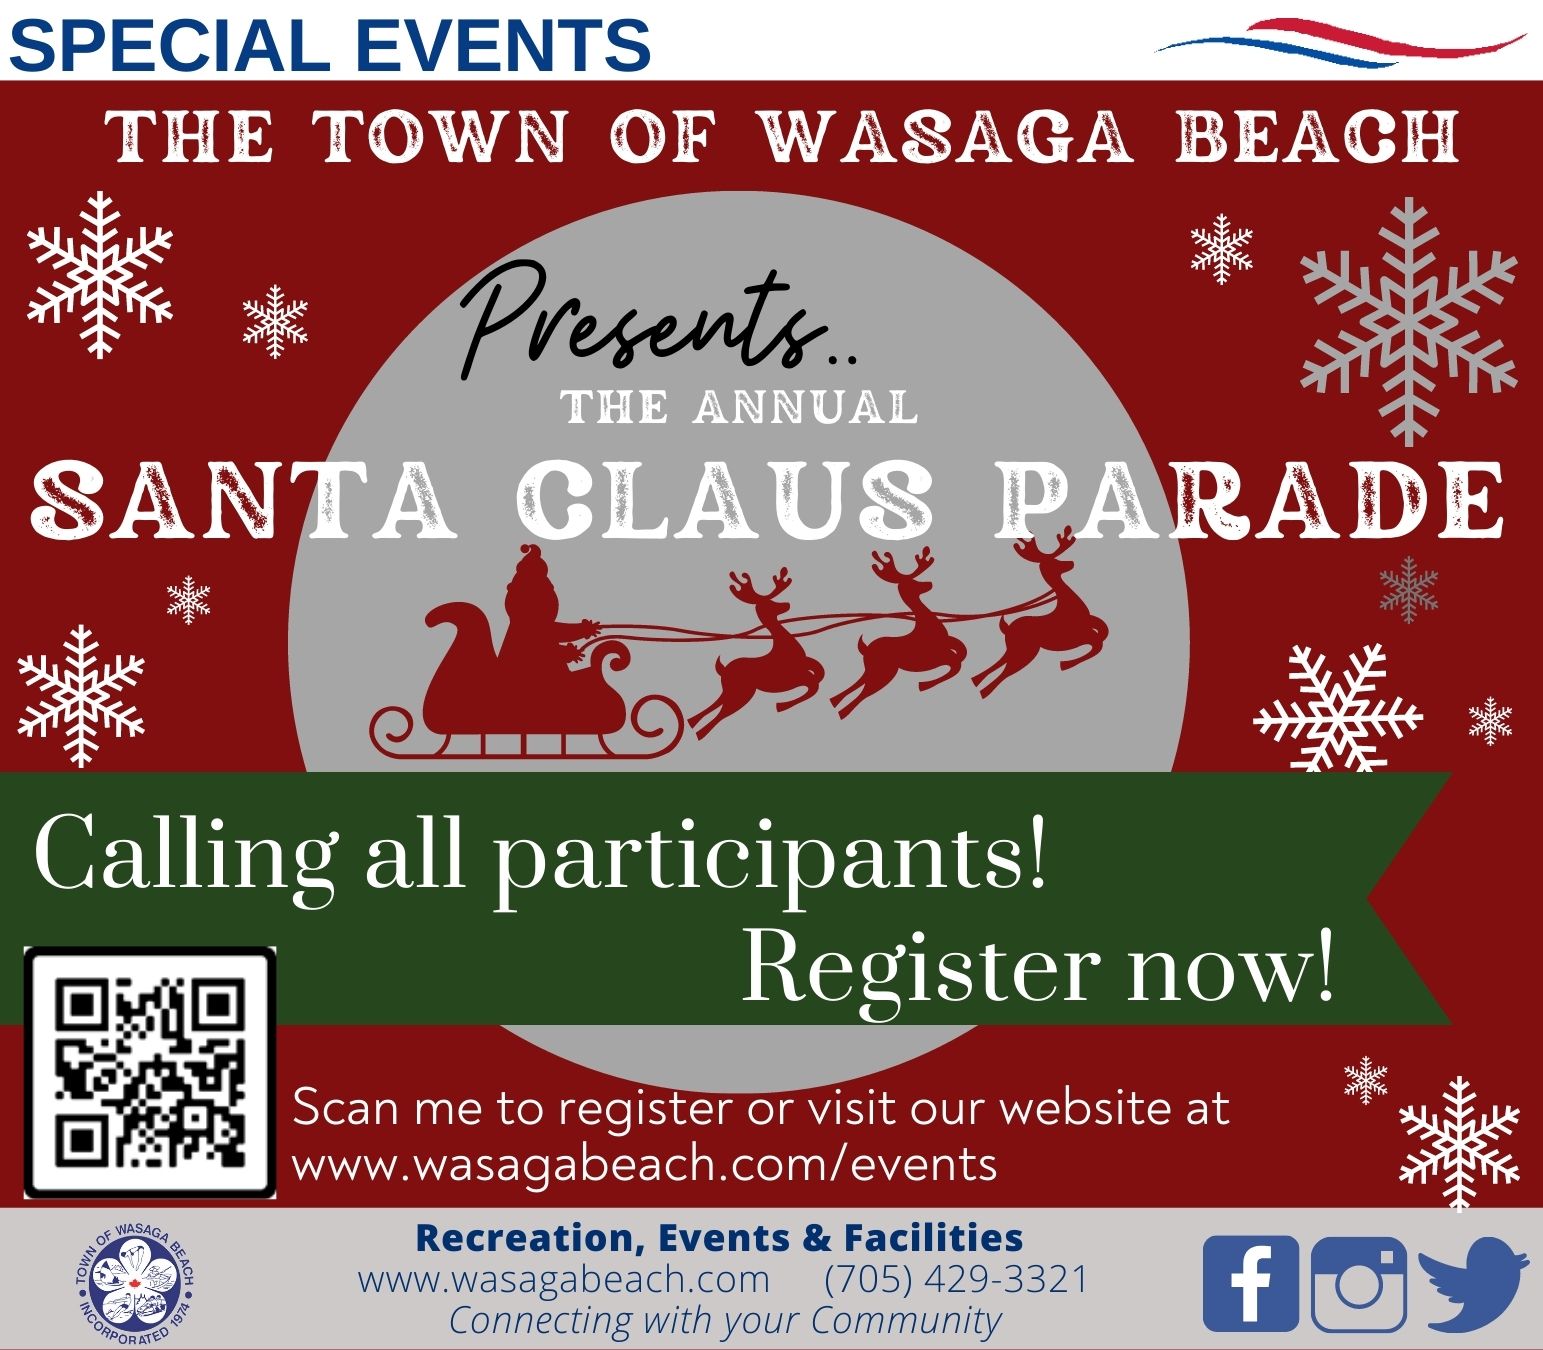 Calling all participants for the Santa Claus Parade